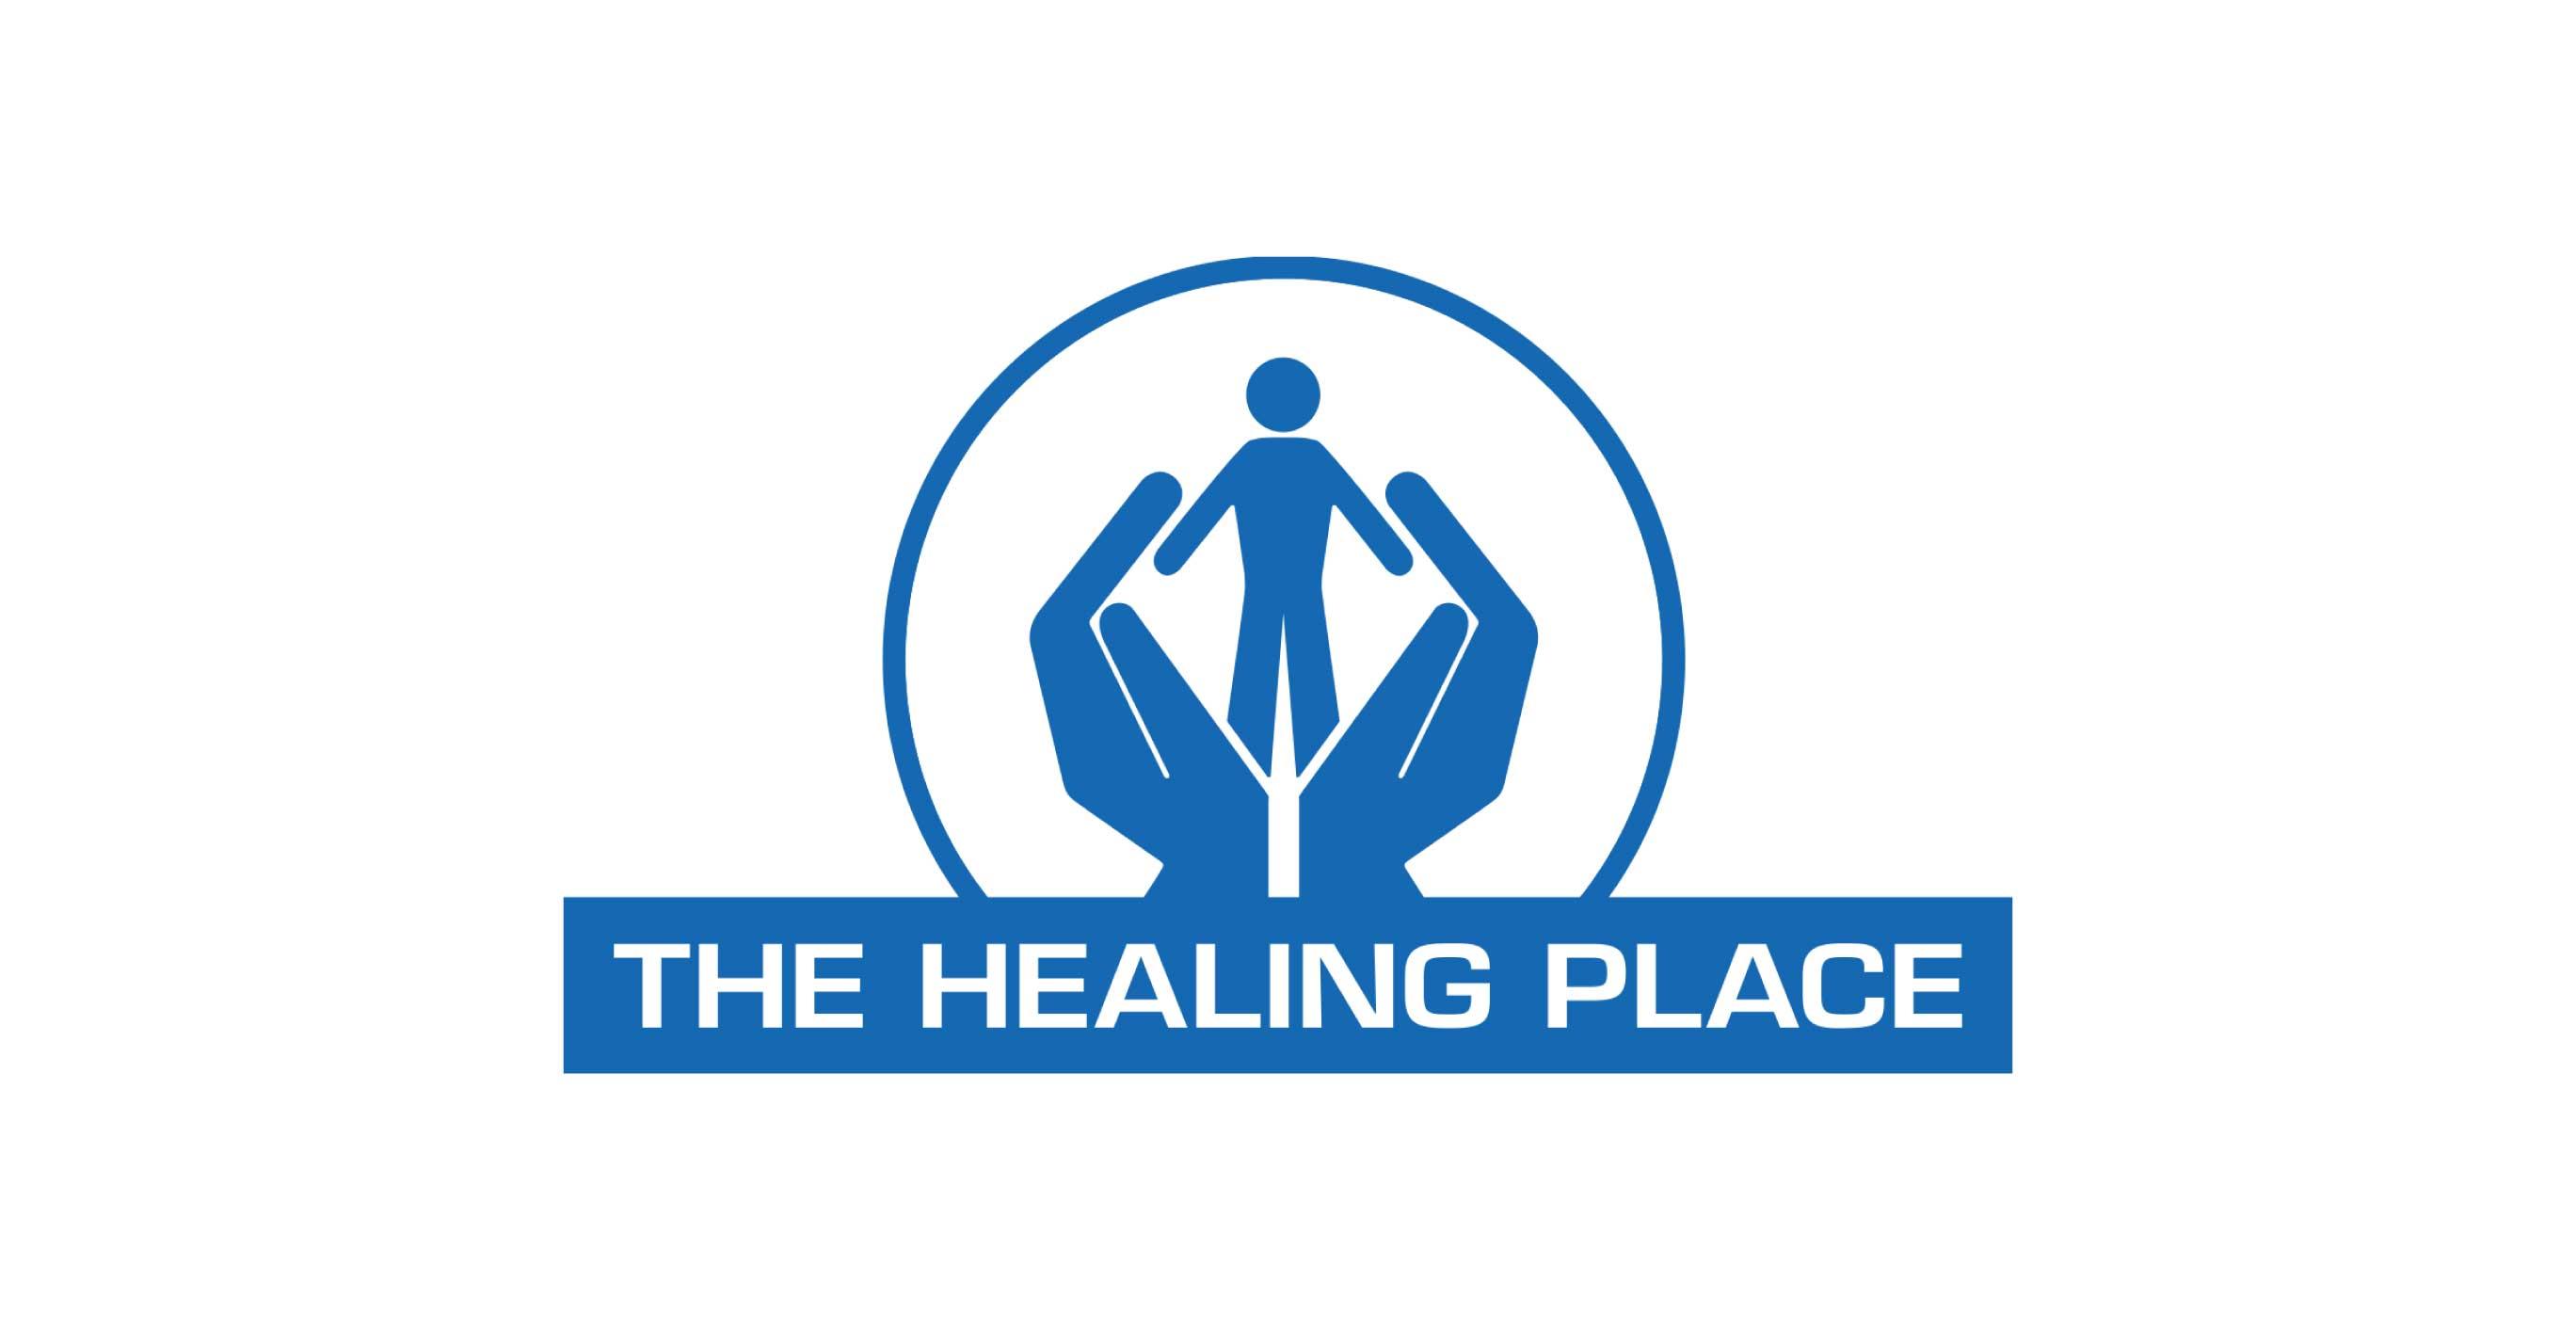 Giving: The Healing Place